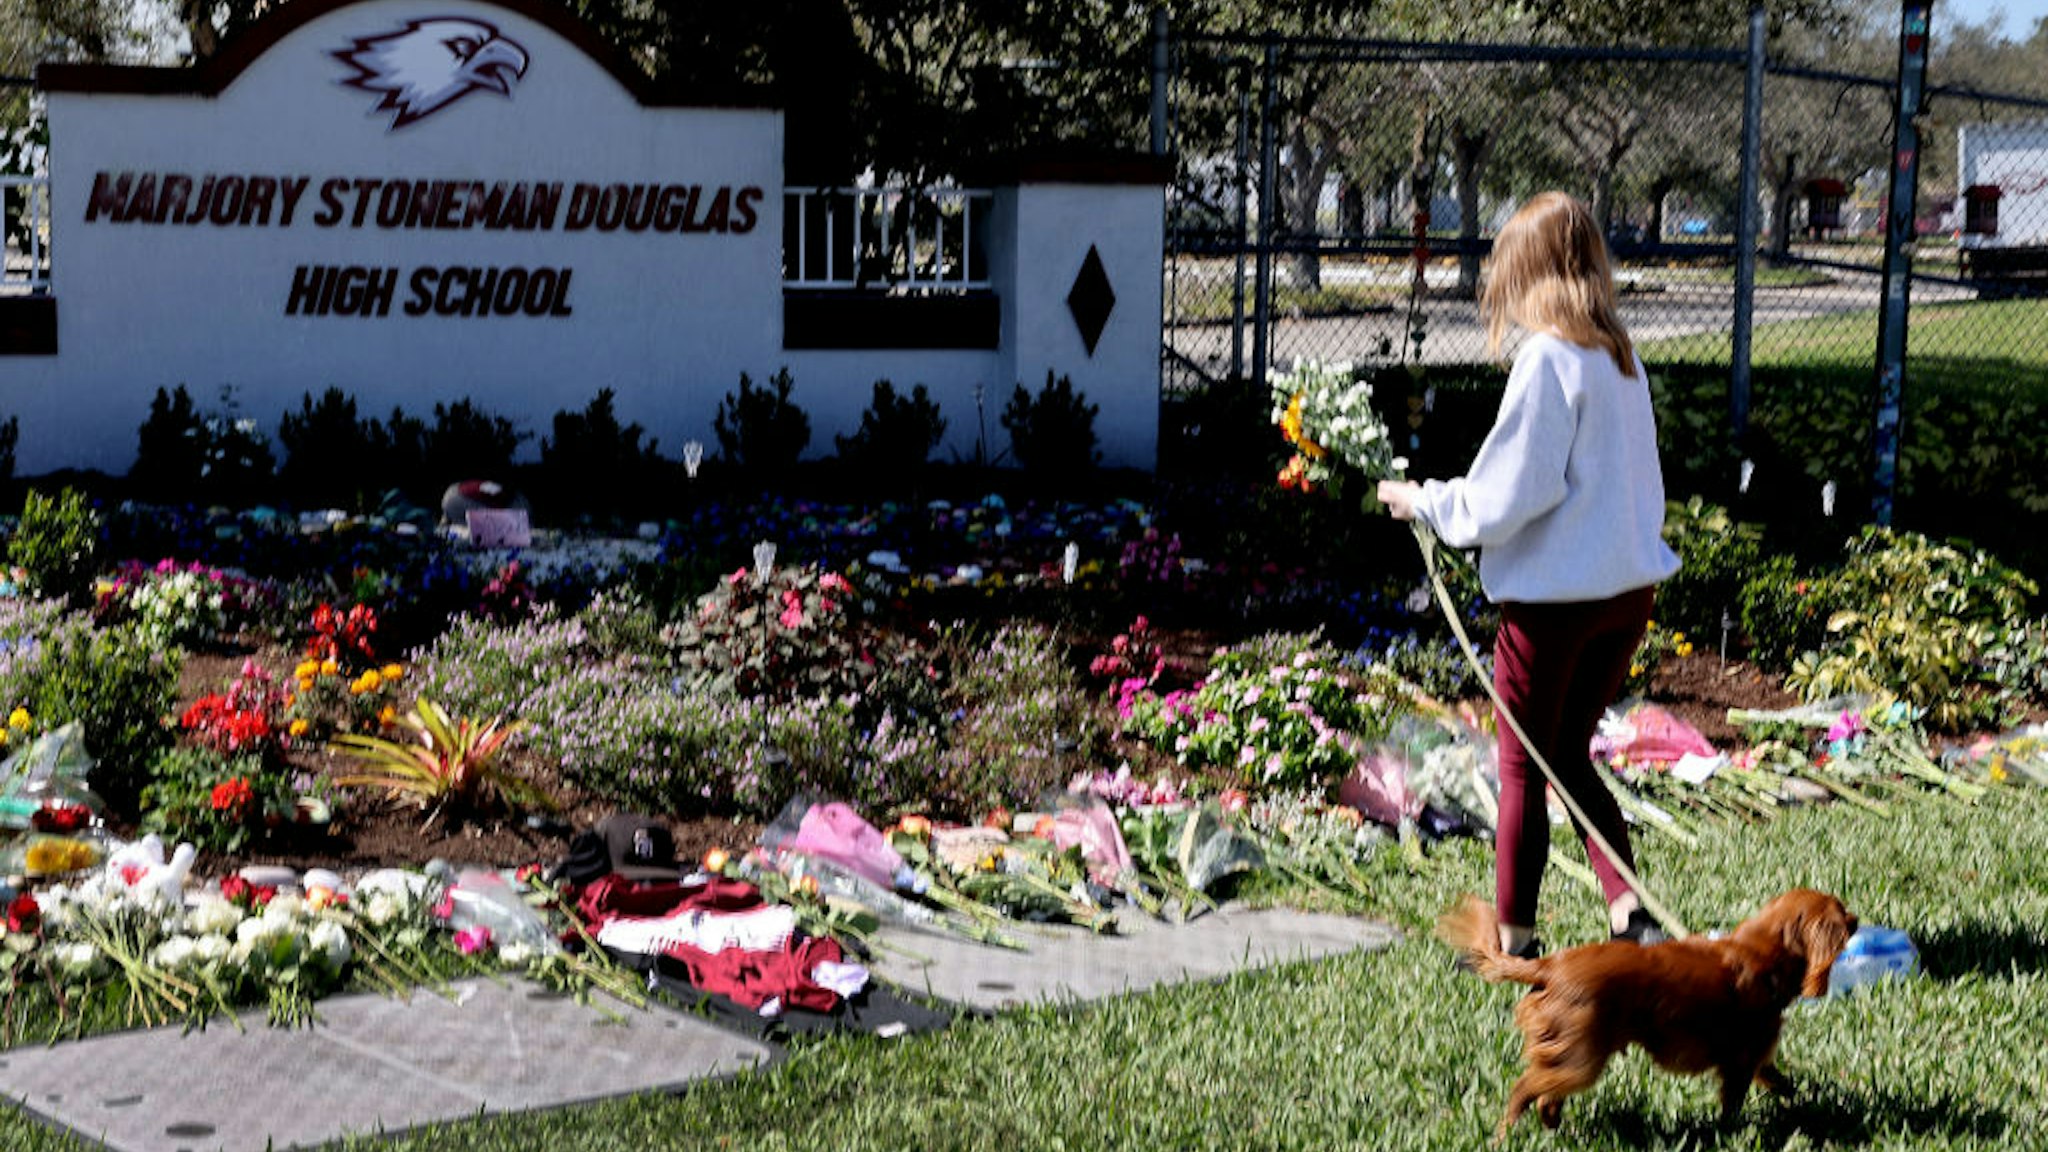 Emma Cabak places flowers on a memorial in front of Marjory Stoneman Douglas High School to honor those killed during a mass shooting on February 14, 2022 in Parkland, Florida.